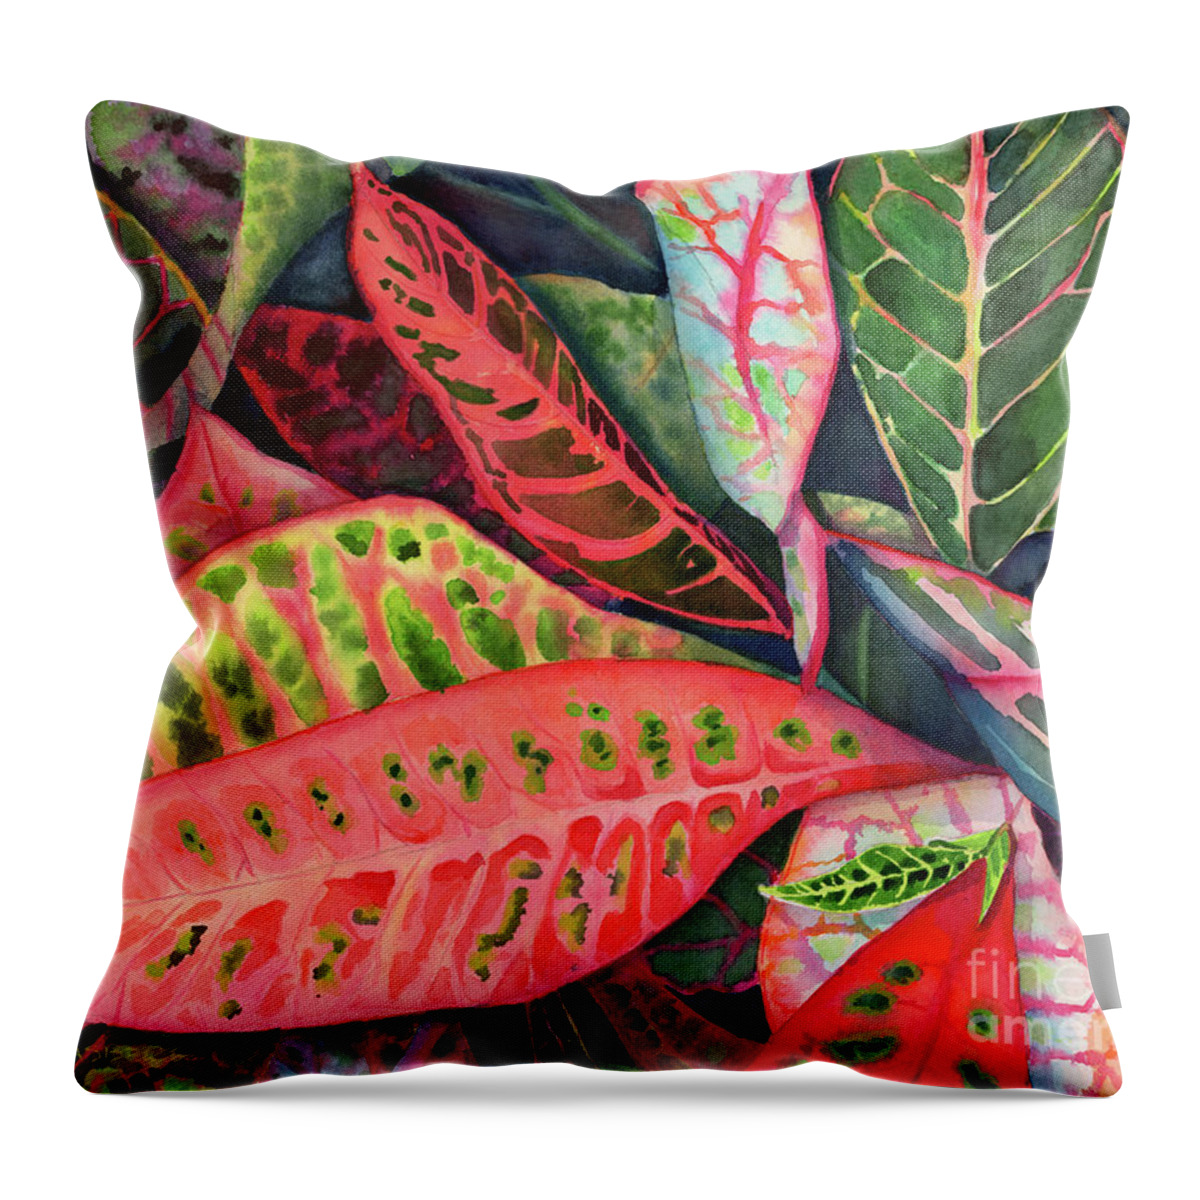 Facemask Throw Pillow featuring the painting Exuberance by Lois Blasberg